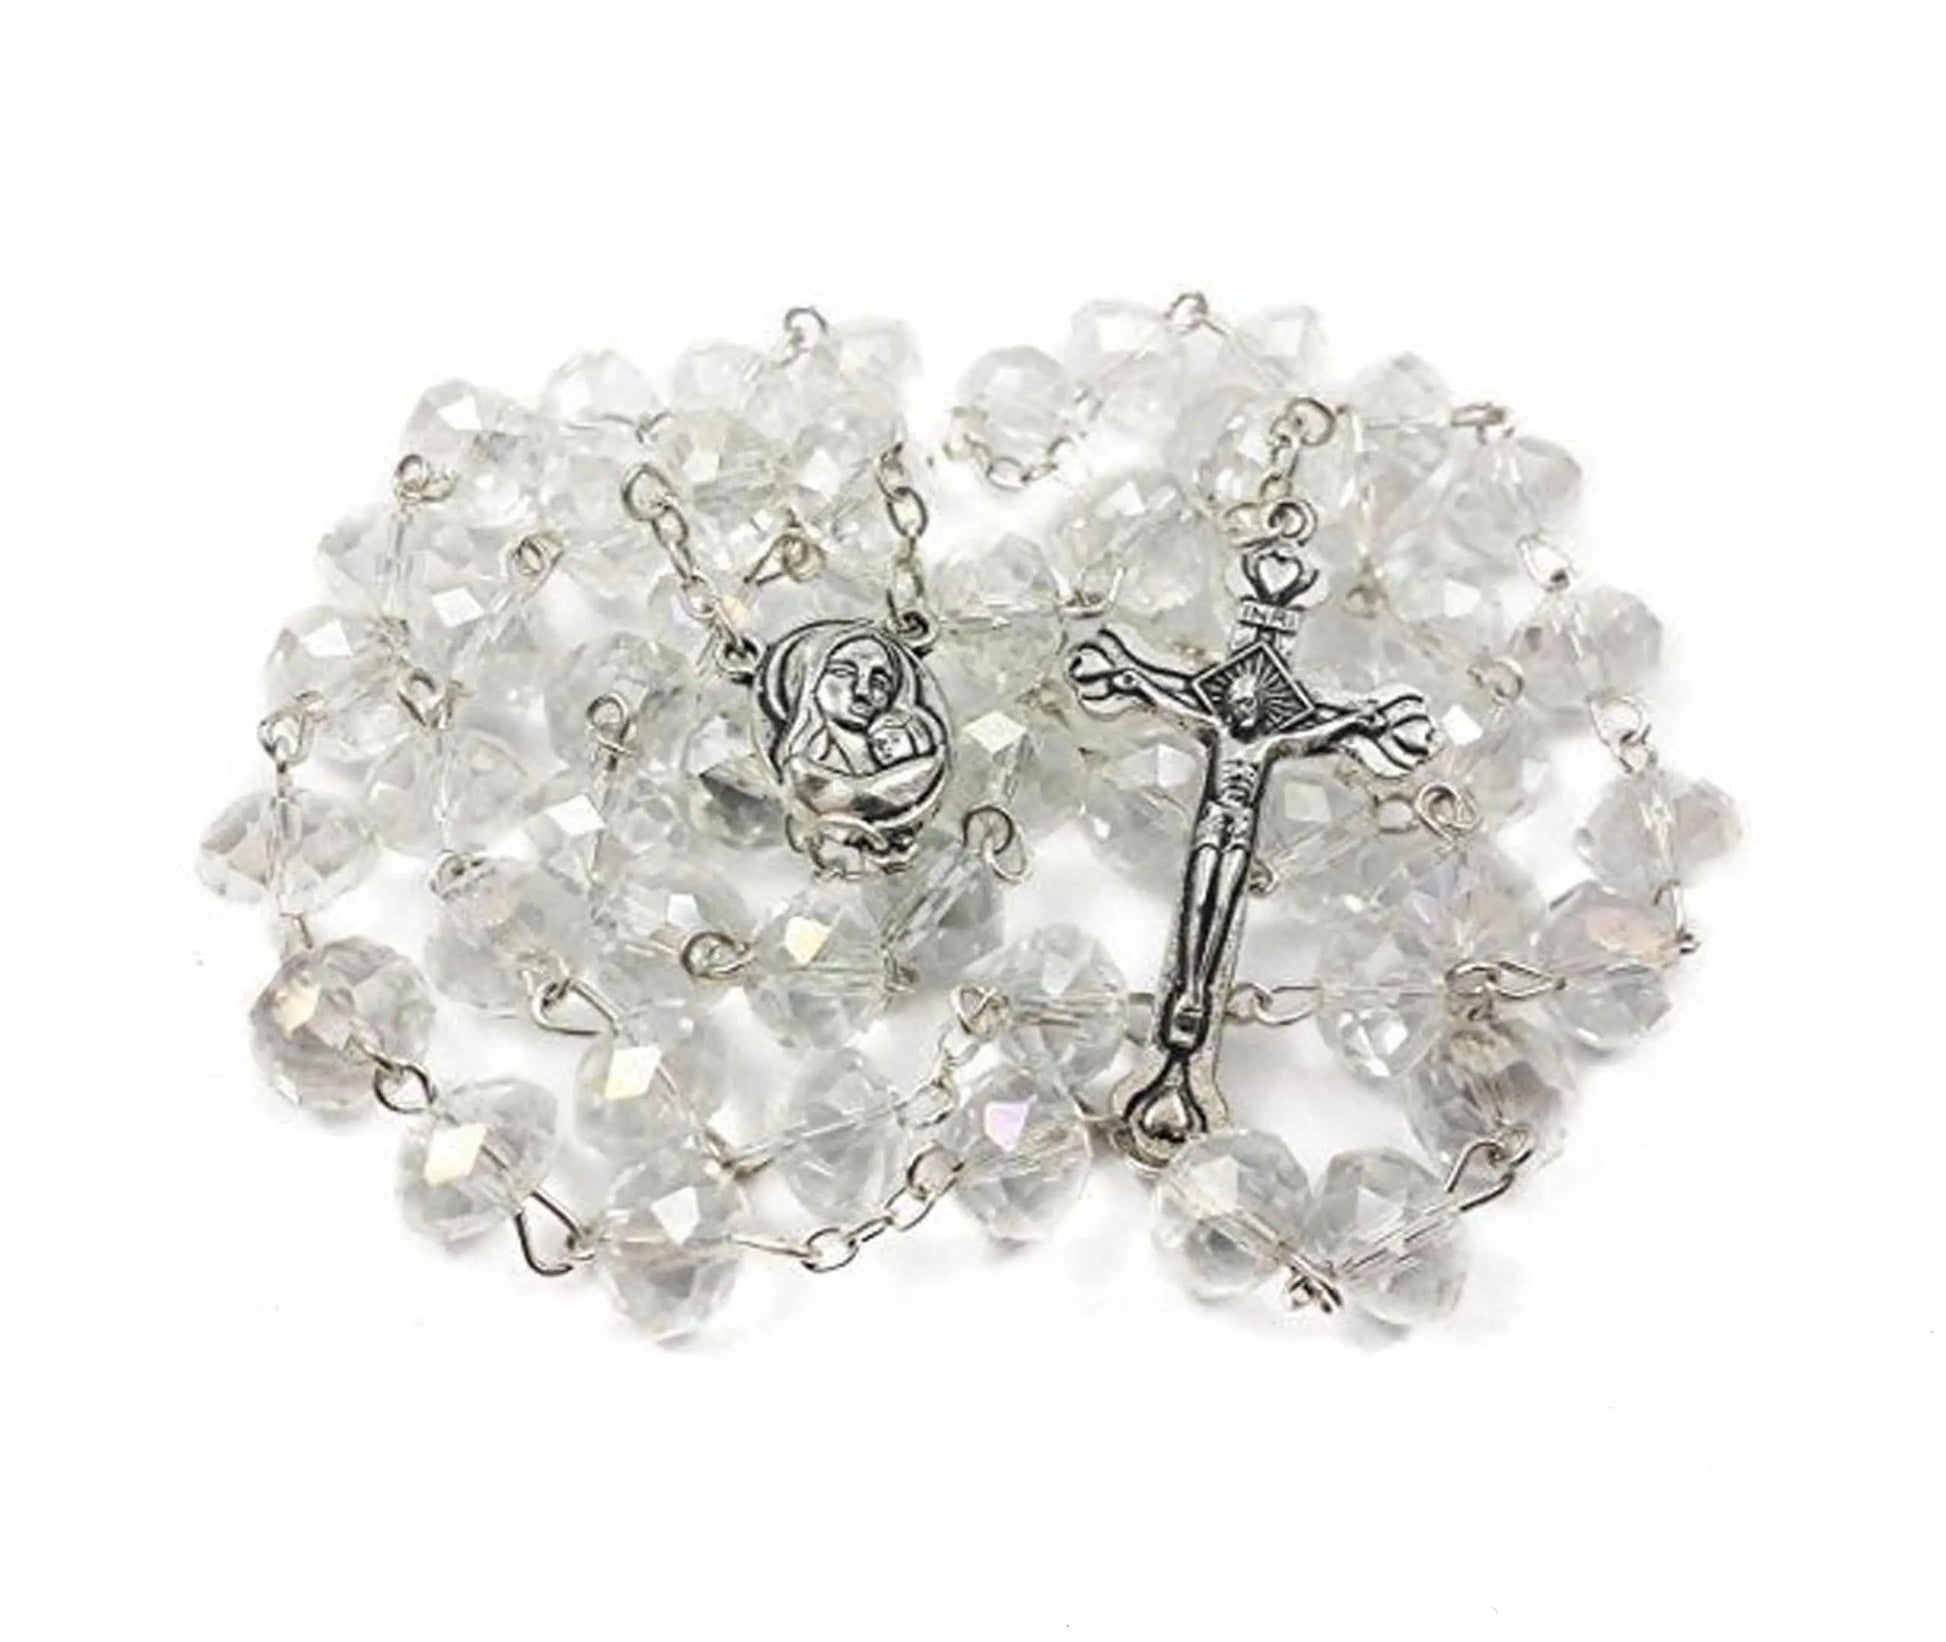 White Crystal Beads Rosary Necklace Holy Soil Medal & Cross Crucifix 